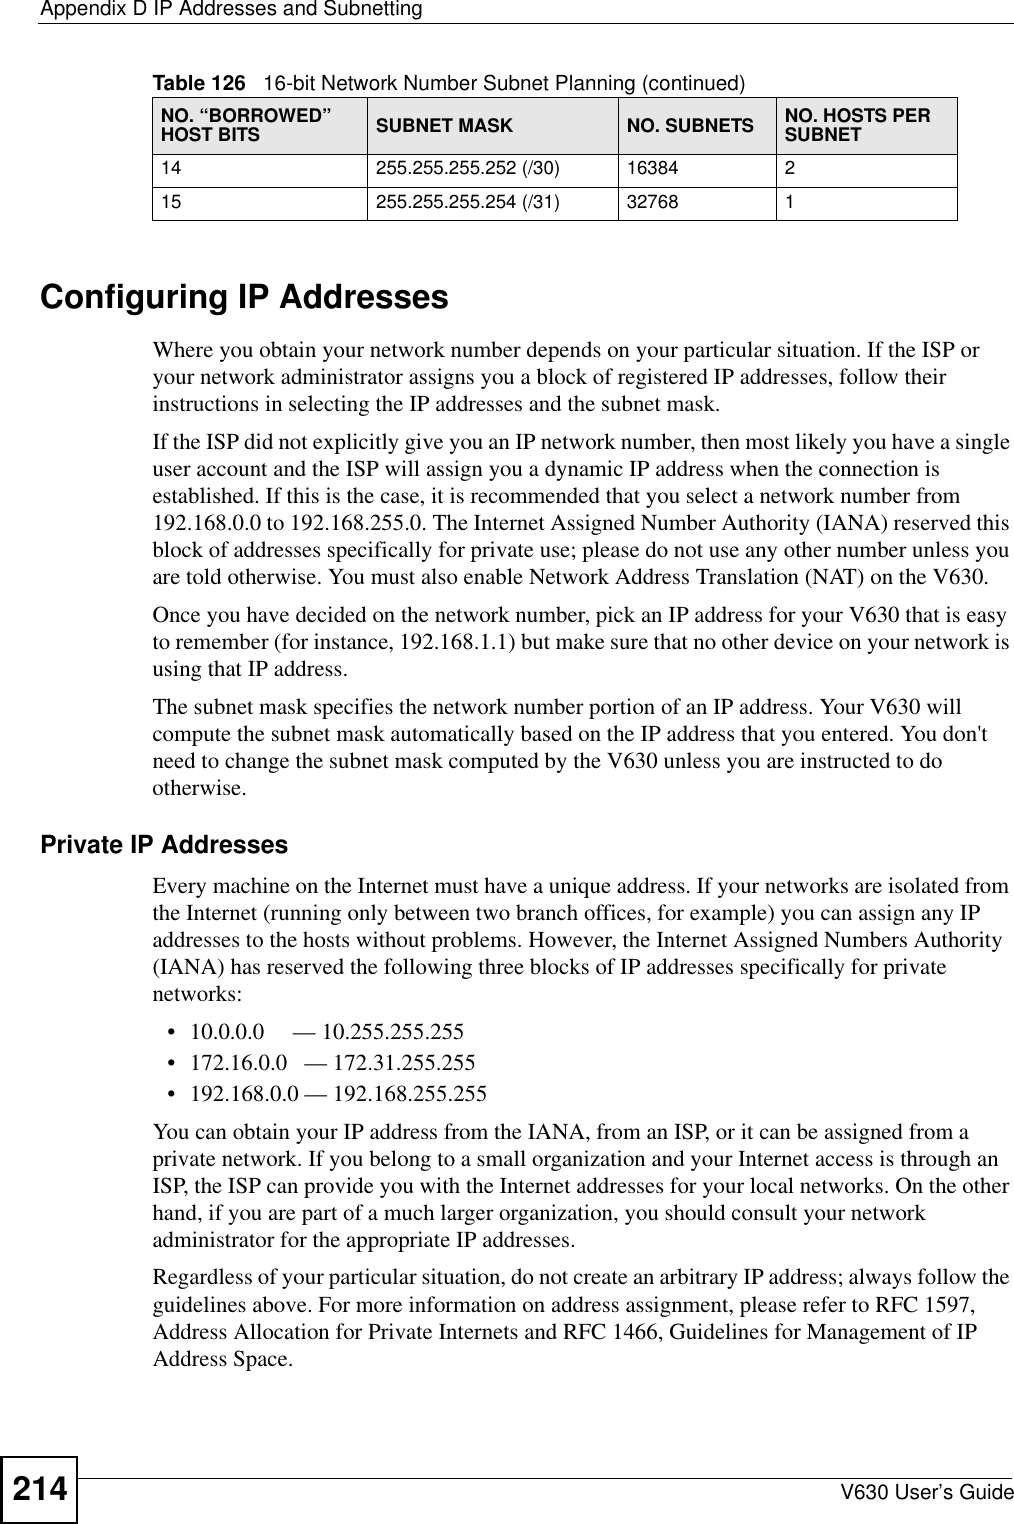 Appendix D IP Addresses and SubnettingV630 User’s Guide214Configuring IP AddressesWhere you obtain your network number depends on your particular situation. If the ISP or your network administrator assigns you a block of registered IP addresses, follow their instructions in selecting the IP addresses and the subnet mask.If the ISP did not explicitly give you an IP network number, then most likely you have a single user account and the ISP will assign you a dynamic IP address when the connection is established. If this is the case, it is recommended that you select a network number from 192.168.0.0 to 192.168.255.0. The Internet Assigned Number Authority (IANA) reserved this block of addresses specifically for private use; please do not use any other number unless you are told otherwise. You must also enable Network Address Translation (NAT) on the V630. Once you have decided on the network number, pick an IP address for your V630 that is easy to remember (for instance, 192.168.1.1) but make sure that no other device on your network is using that IP address.The subnet mask specifies the network number portion of an IP address. Your V630 will compute the subnet mask automatically based on the IP address that you entered. You don&apos;t need to change the subnet mask computed by the V630 unless you are instructed to do otherwise.Private IP AddressesEvery machine on the Internet must have a unique address. If your networks are isolated from the Internet (running only between two branch offices, for example) you can assign any IP addresses to the hosts without problems. However, the Internet Assigned Numbers Authority (IANA) has reserved the following three blocks of IP addresses specifically for private networks:• 10.0.0.0     — 10.255.255.255• 172.16.0.0   — 172.31.255.255• 192.168.0.0 — 192.168.255.255You can obtain your IP address from the IANA, from an ISP, or it can be assigned from a private network. If you belong to a small organization and your Internet access is through an ISP, the ISP can provide you with the Internet addresses for your local networks. On the other hand, if you are part of a much larger organization, you should consult your network administrator for the appropriate IP addresses.Regardless of your particular situation, do not create an arbitrary IP address; always follow the guidelines above. For more information on address assignment, please refer to RFC 1597, Address Allocation for Private Internets and RFC 1466, Guidelines for Management of IP Address Space.14 255.255.255.252 (/30) 16384 215 255.255.255.254 (/31) 32768 1Table 126   16-bit Network Number Subnet Planning (continued)NO. “BORROWED” HOST BITS SUBNET MASK NO. SUBNETS NO. HOSTS PER SUBNET